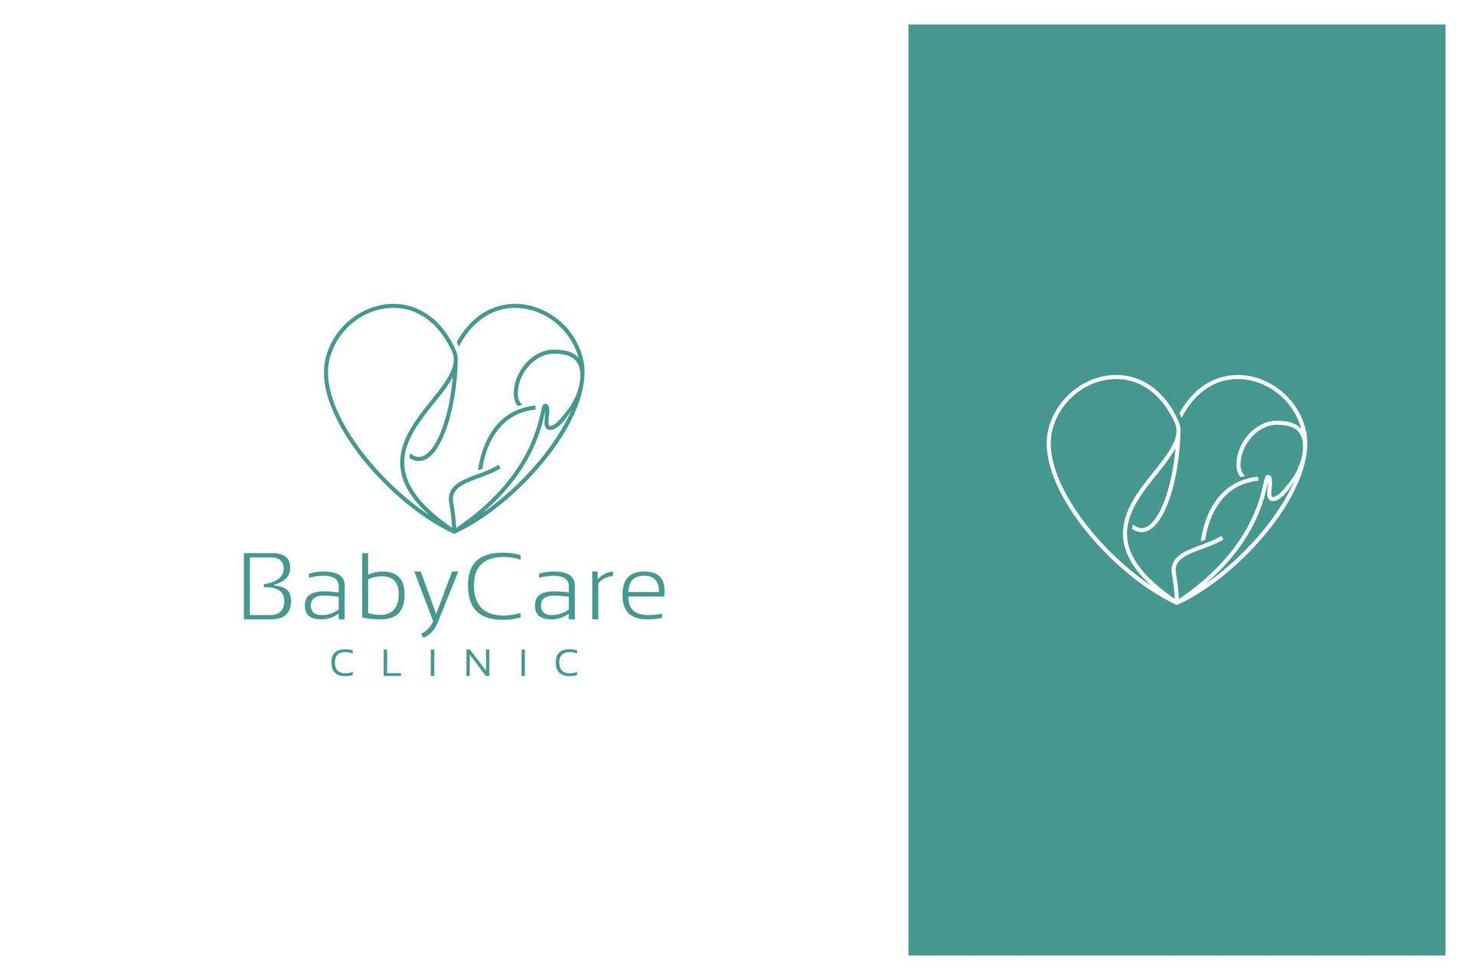 mother and baby logo design with line art style vector